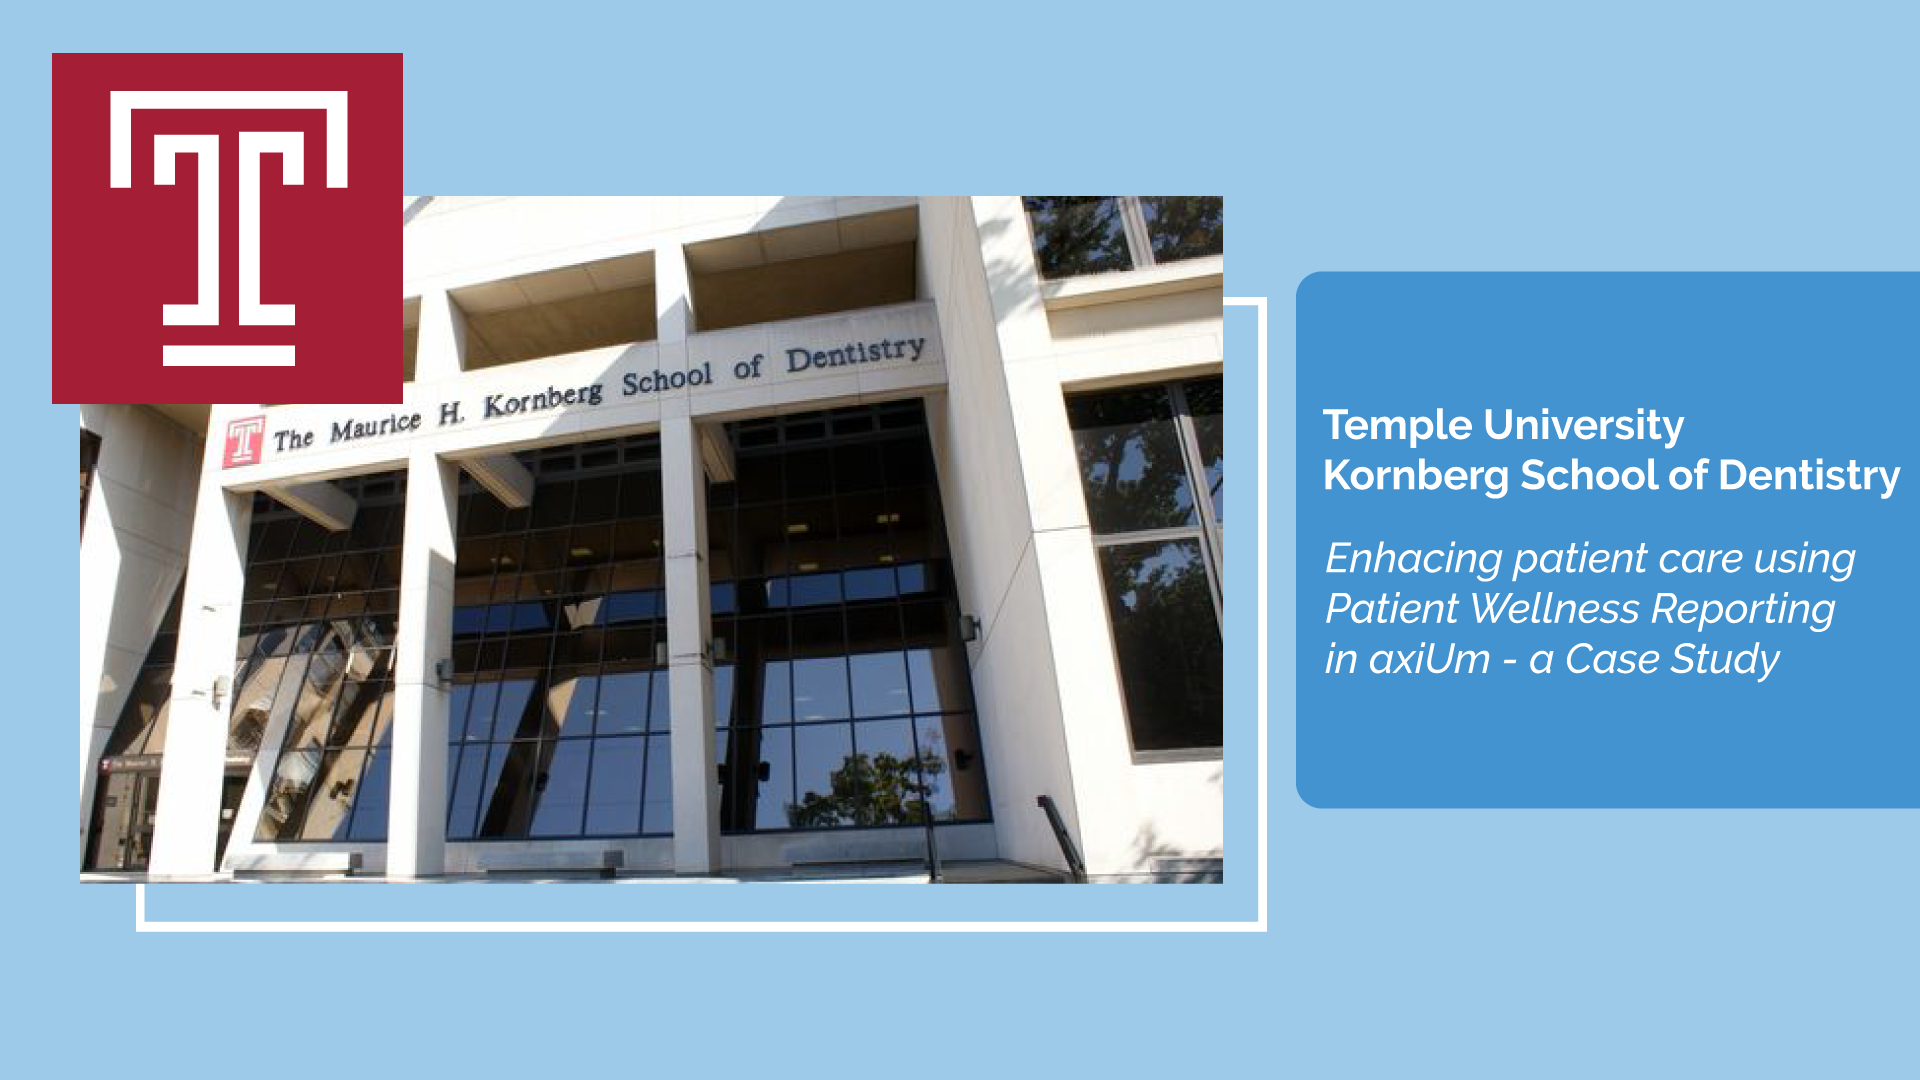 Temple University, Kornberg School of Dentistry: Patient Wellness Reporting with axiUm – A Case Study